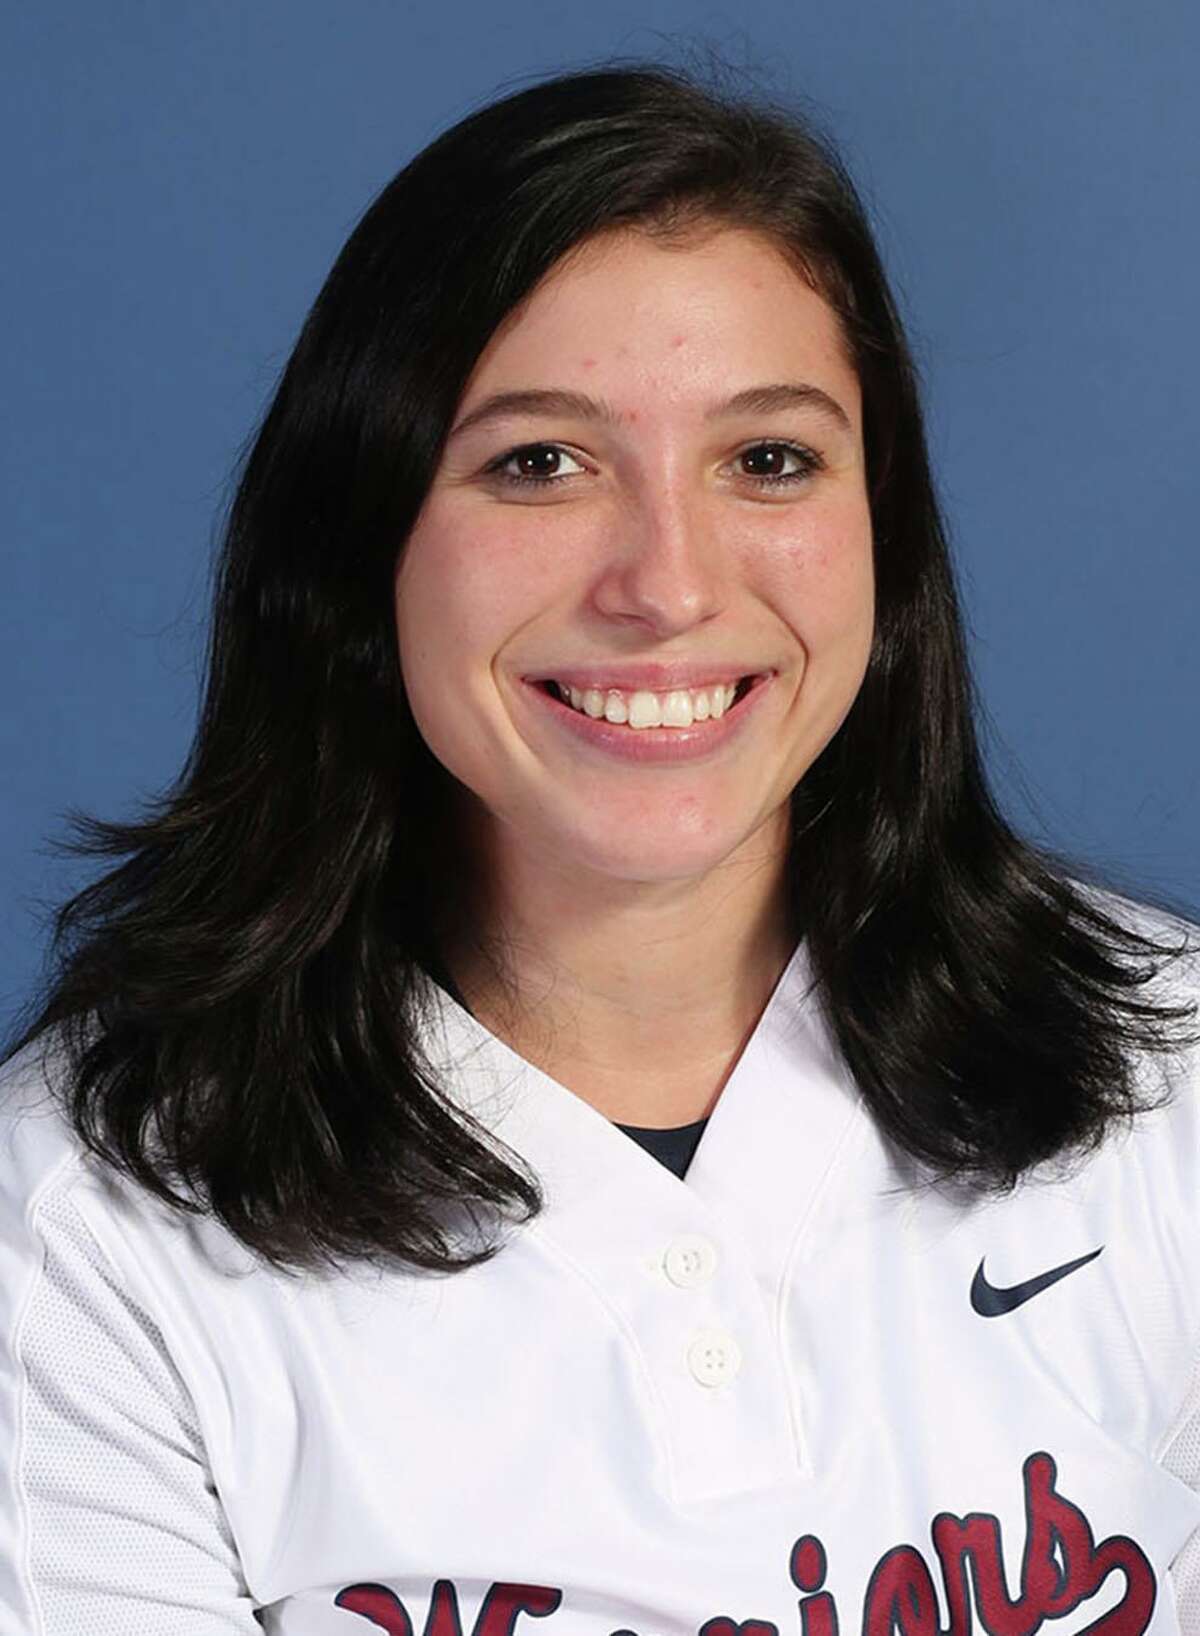 Eastern Connecticut sophomore Alexis Michon is the Little East Conference pitcher of the year and a first-team NCAA Division III All-American. Michon, of Montville, spent one year at Plymouth State before transferring to Eastern. She is 23-1 with a 0.93 ERA and 189 strikeouts in 143.2 innings. Eastern (43-5) begins play in the eight-team NCAA Division III national championship tournament Thursday against Trine in Salem, Va.